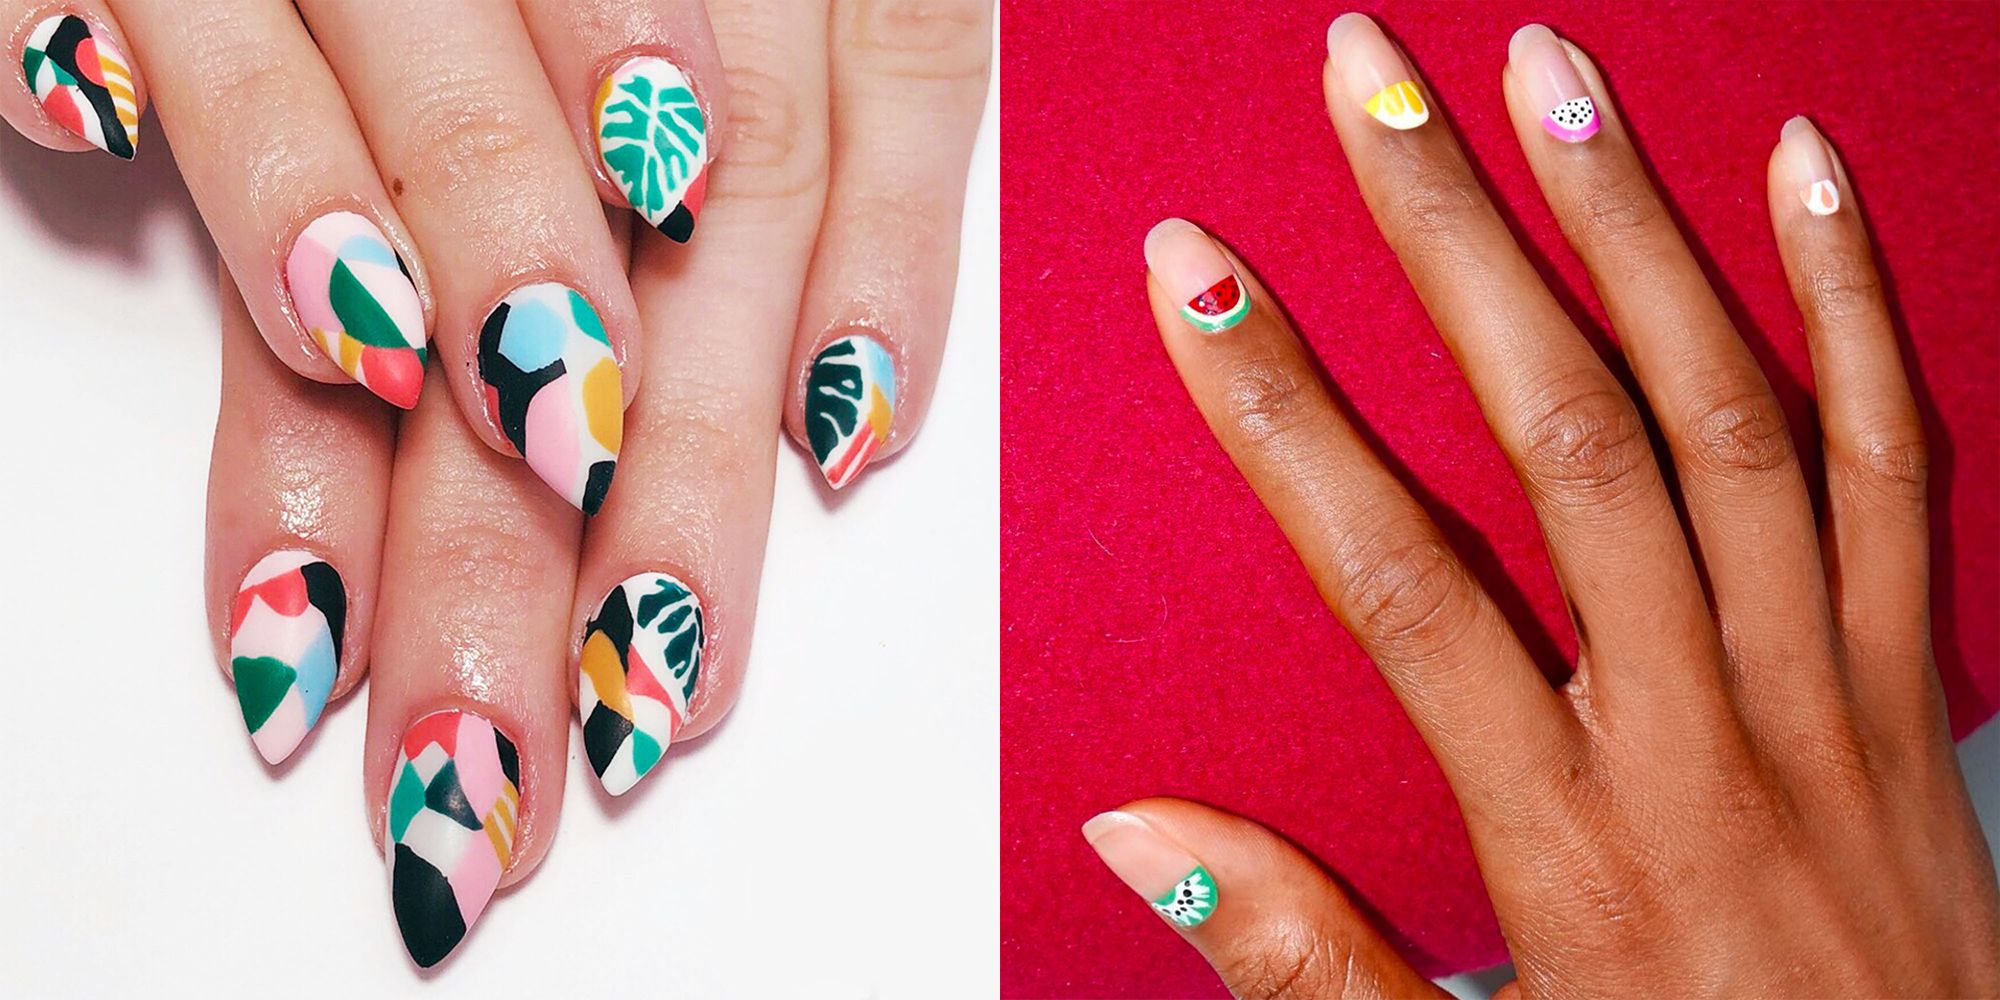 5. 20 Trendy Summer Nail Designs for 2021 - wide 8